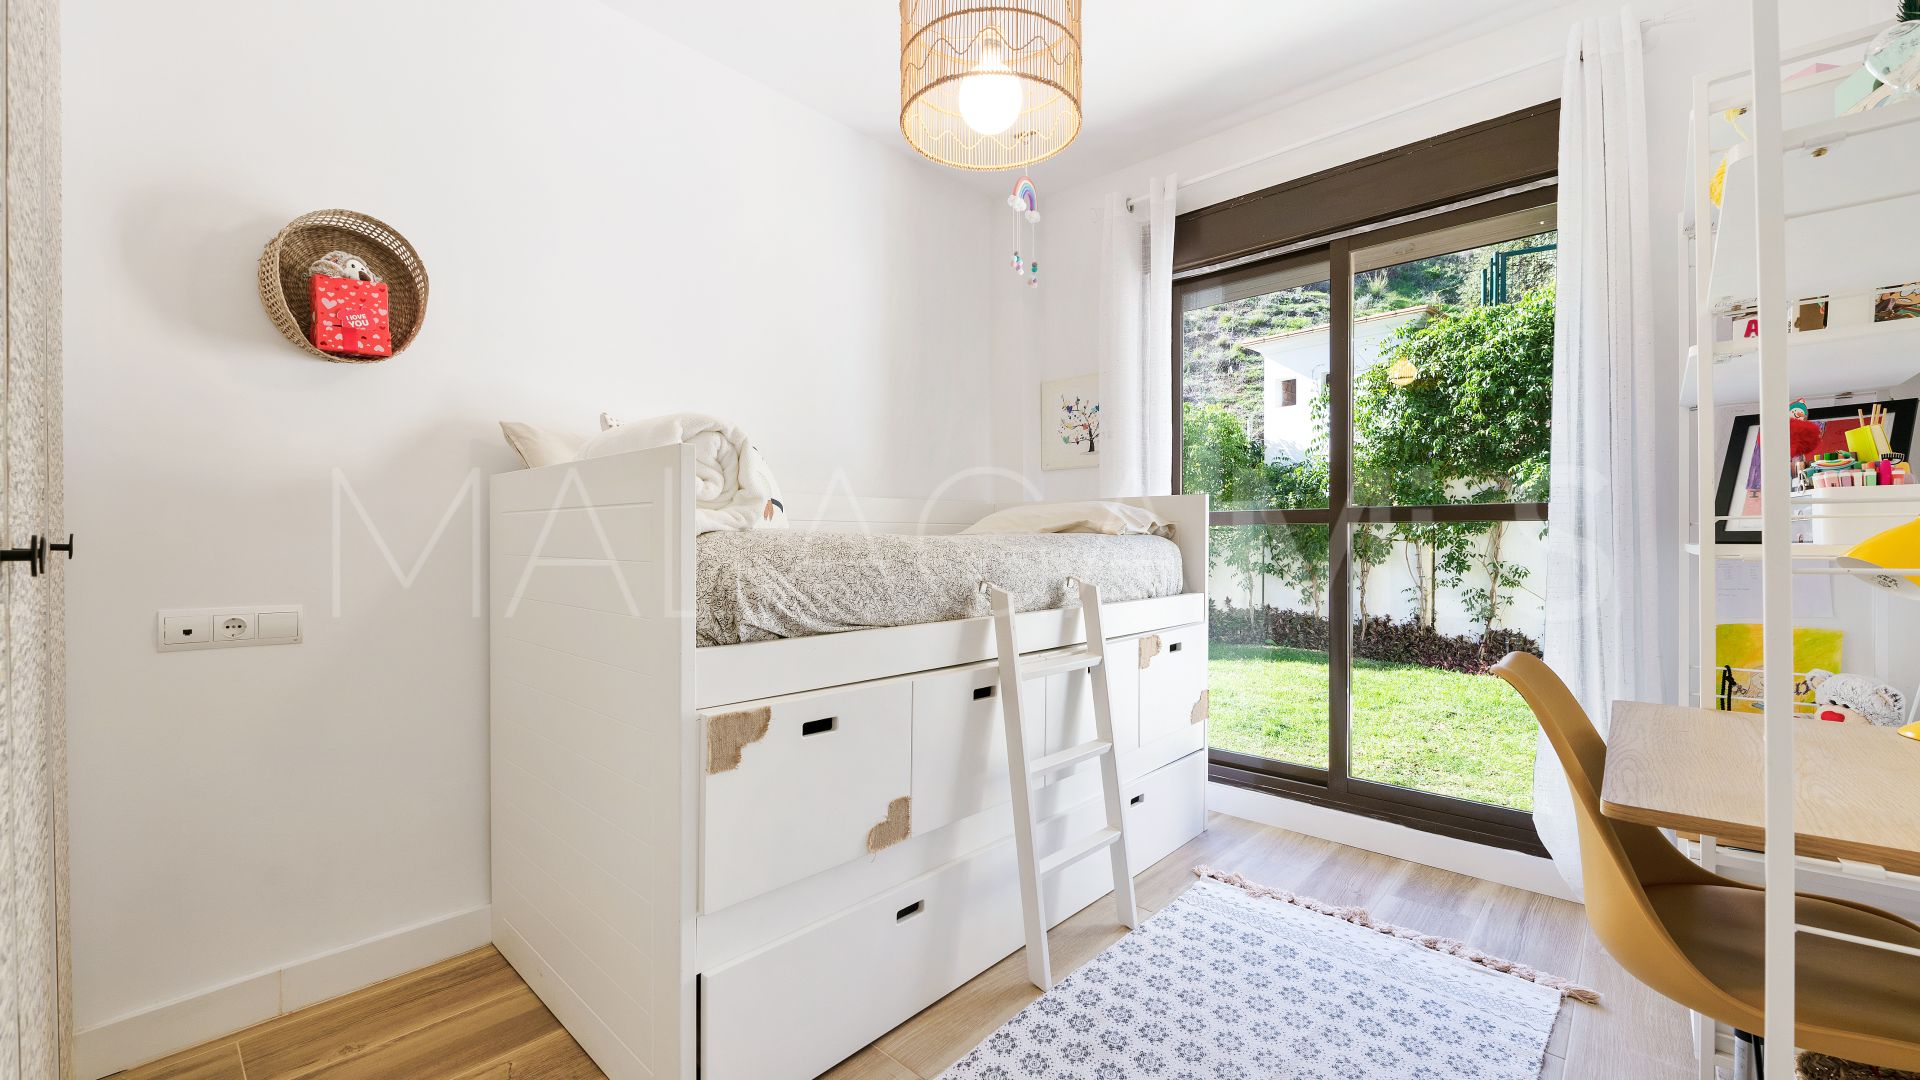 2 bedrooms Selwo ground floor apartment for sale